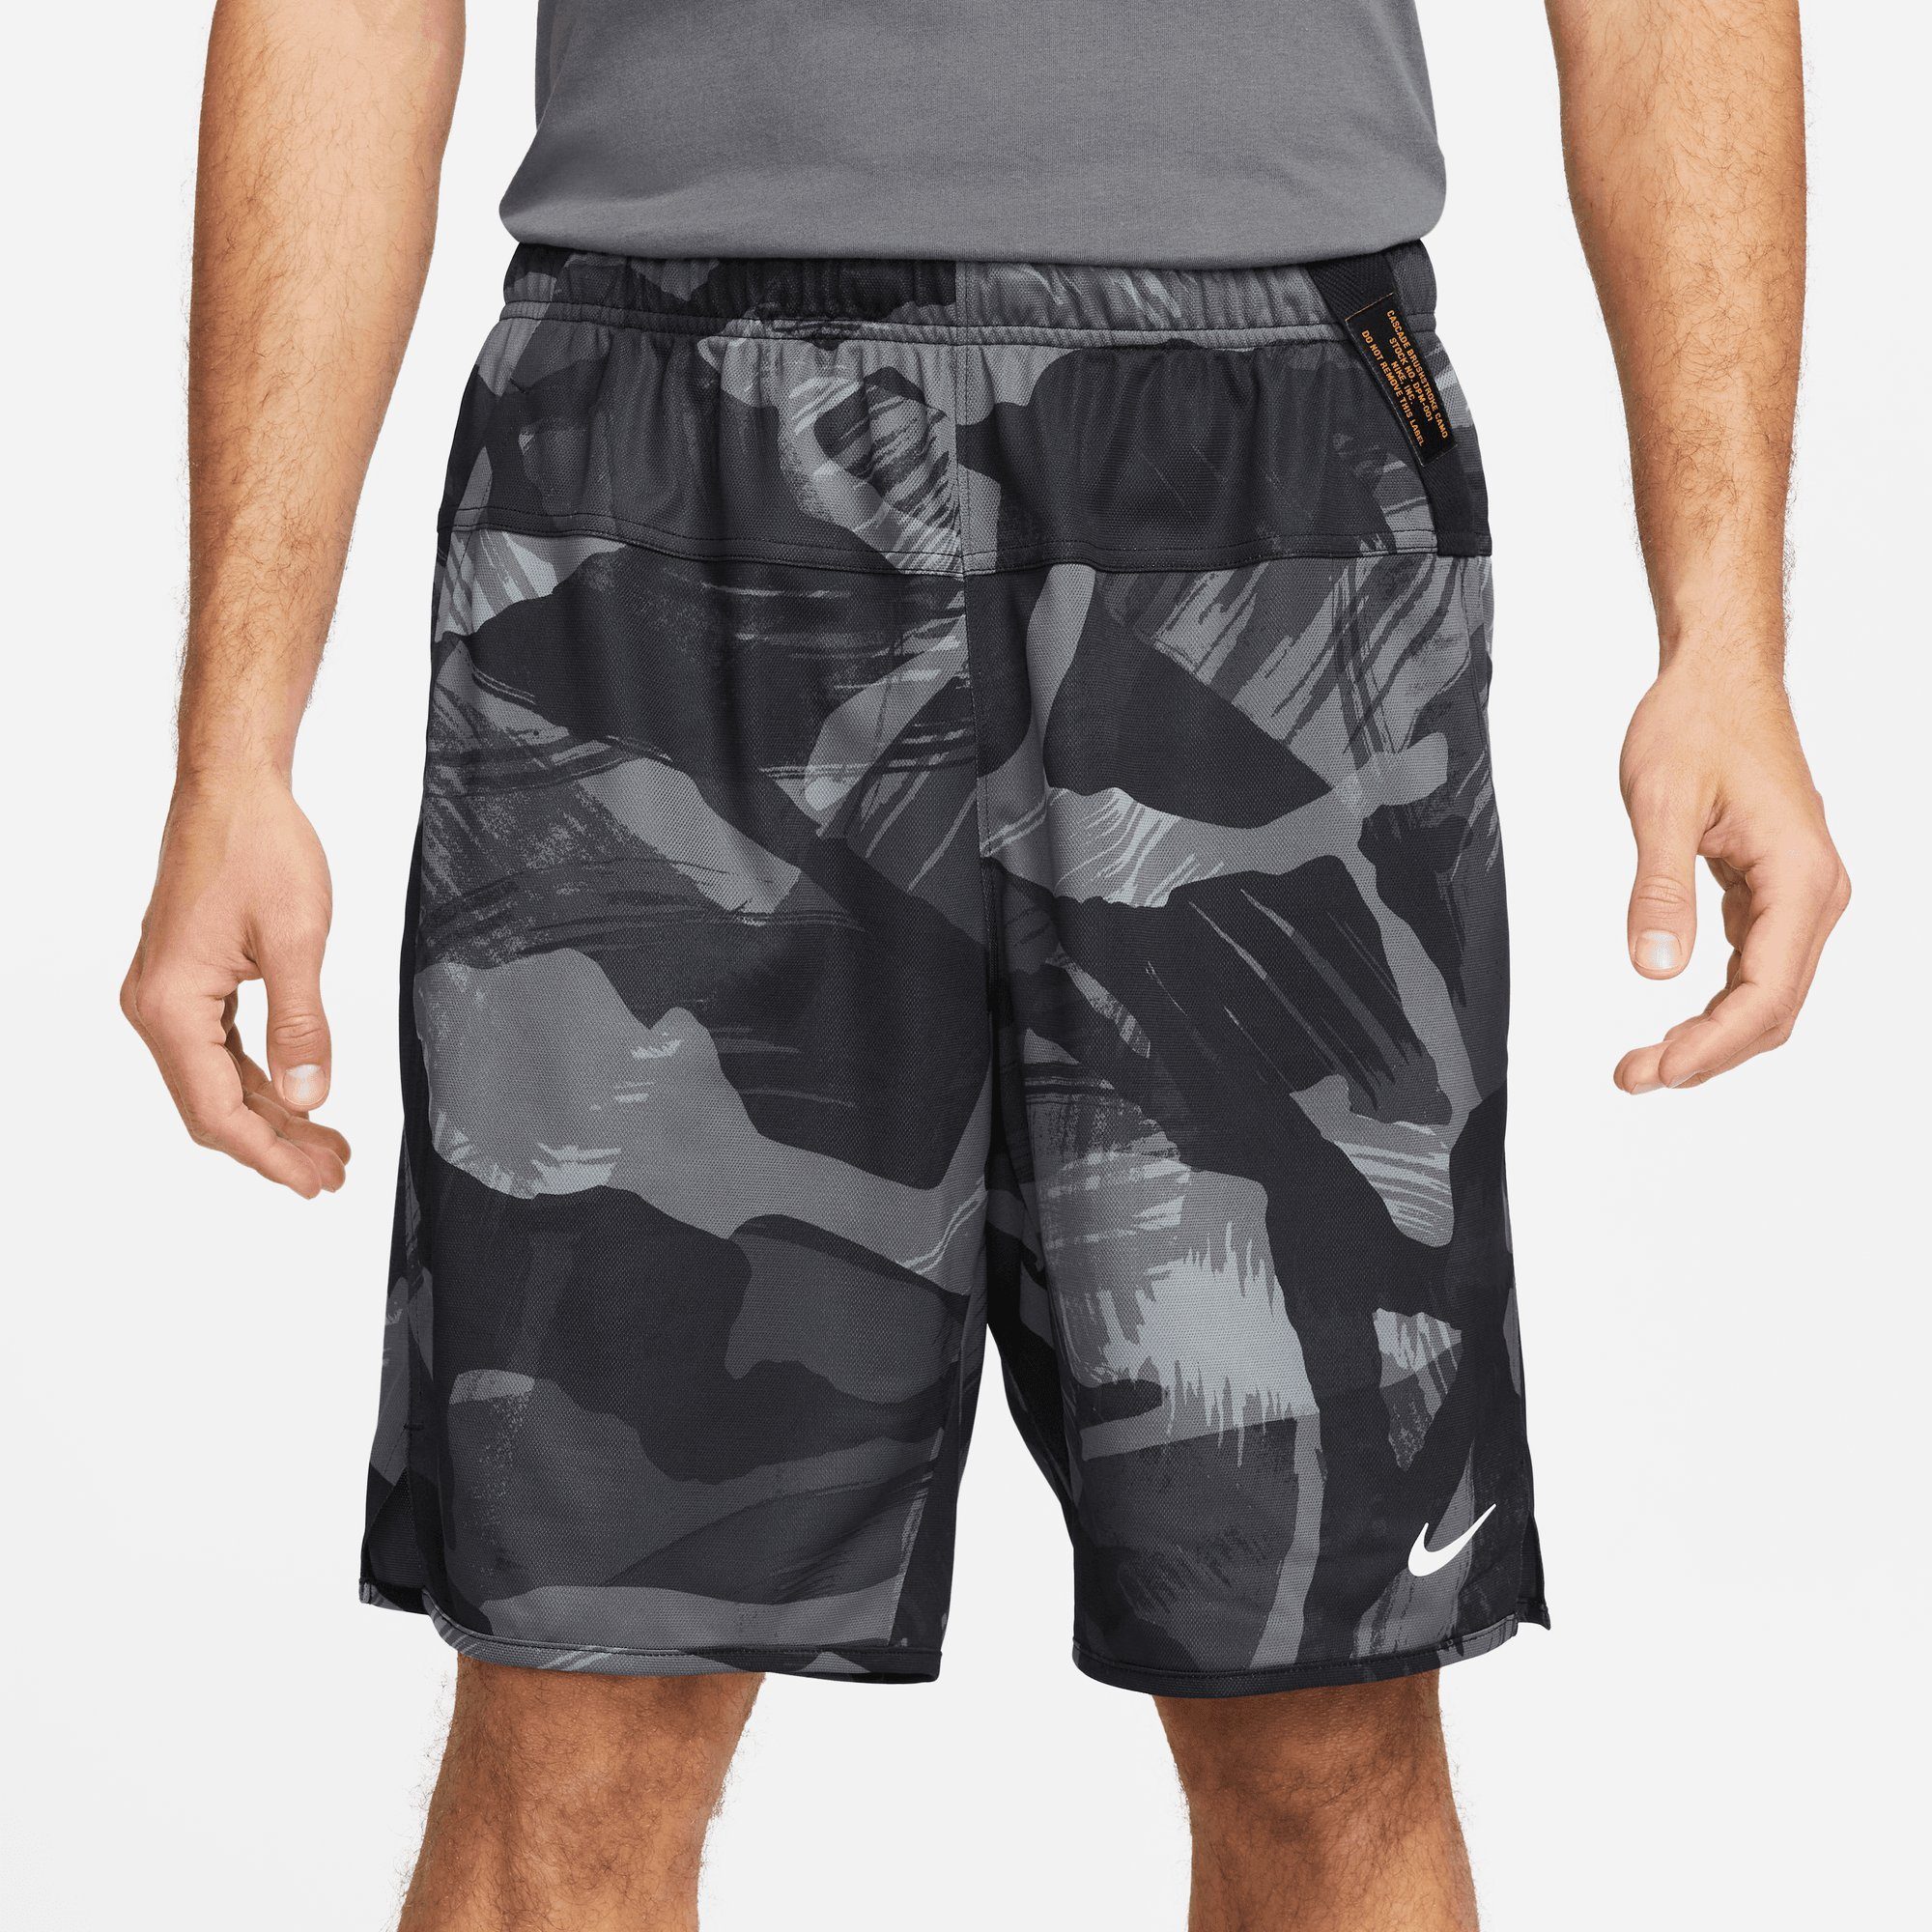 FITNESS SHORTS DRI-FIT " MILK UNLINED TOTALITY Trainingsshorts MEN'S SUEDE/COCONUT CAMO BLACK/GOLD Nike